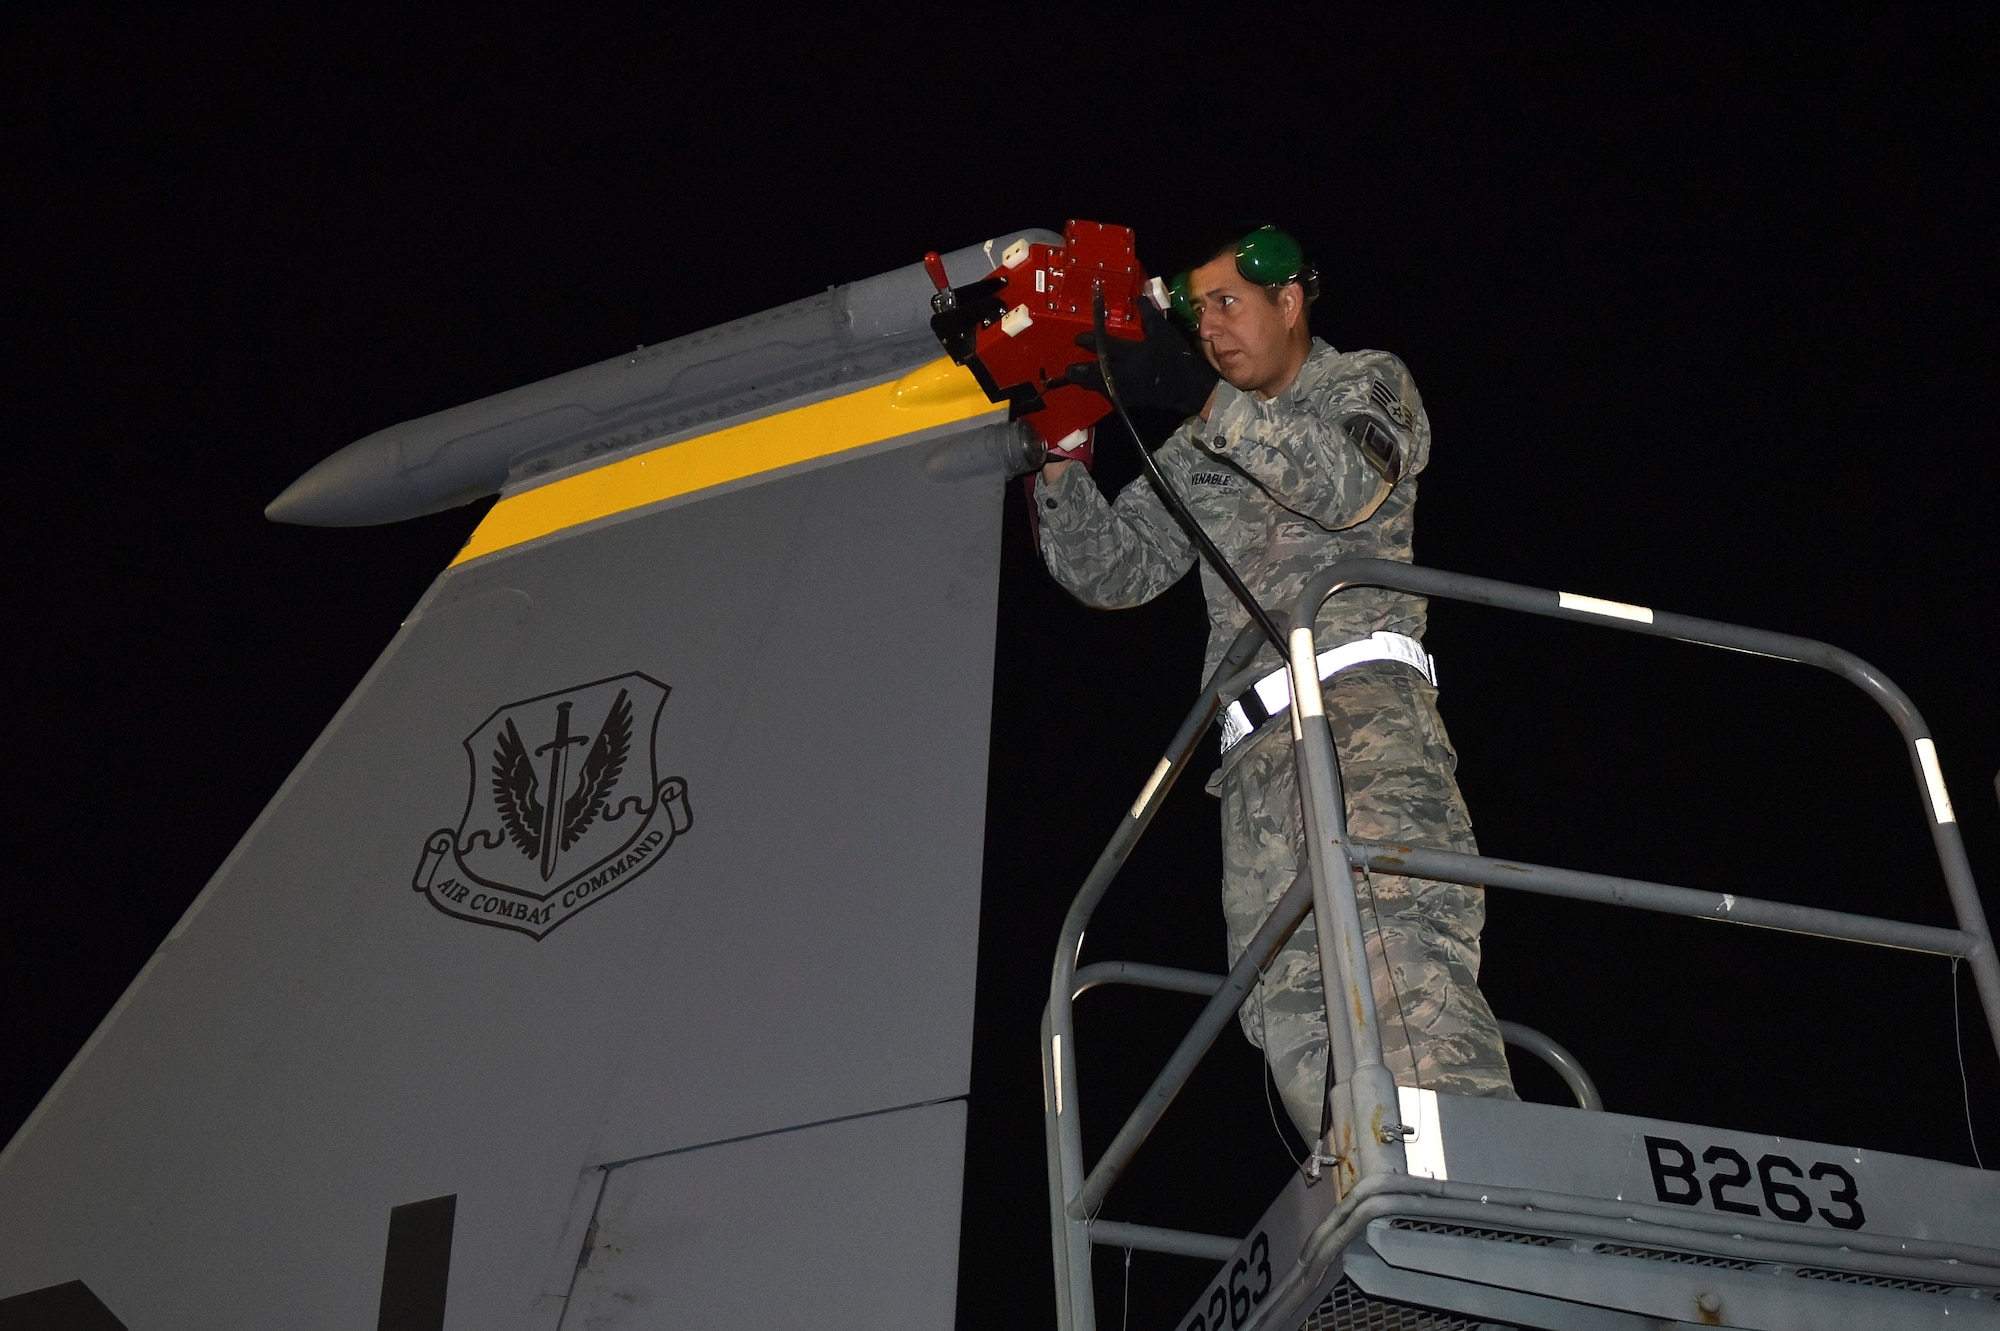 Staff Sgt. Gregory Venable, a Combat Shield team member assigned to the 16th Electronic Warfare Squadron, Eglin Air Force Base, Florida, attaches an antenna coupler to an F-15E Strike Eagle during Combat Shield, Oct. 20, 2015, at Seymour Johnson Air Force Base, North Carolina. Each year, the Combat Shield team compiles test data from across the Combat Air Force, which is reviewed by Air Combat Command to determine the functionality of its aircraft and maintenance program effectiveness. (U.S. Air Force photo/Senior Airman Aaron J. Jenne)